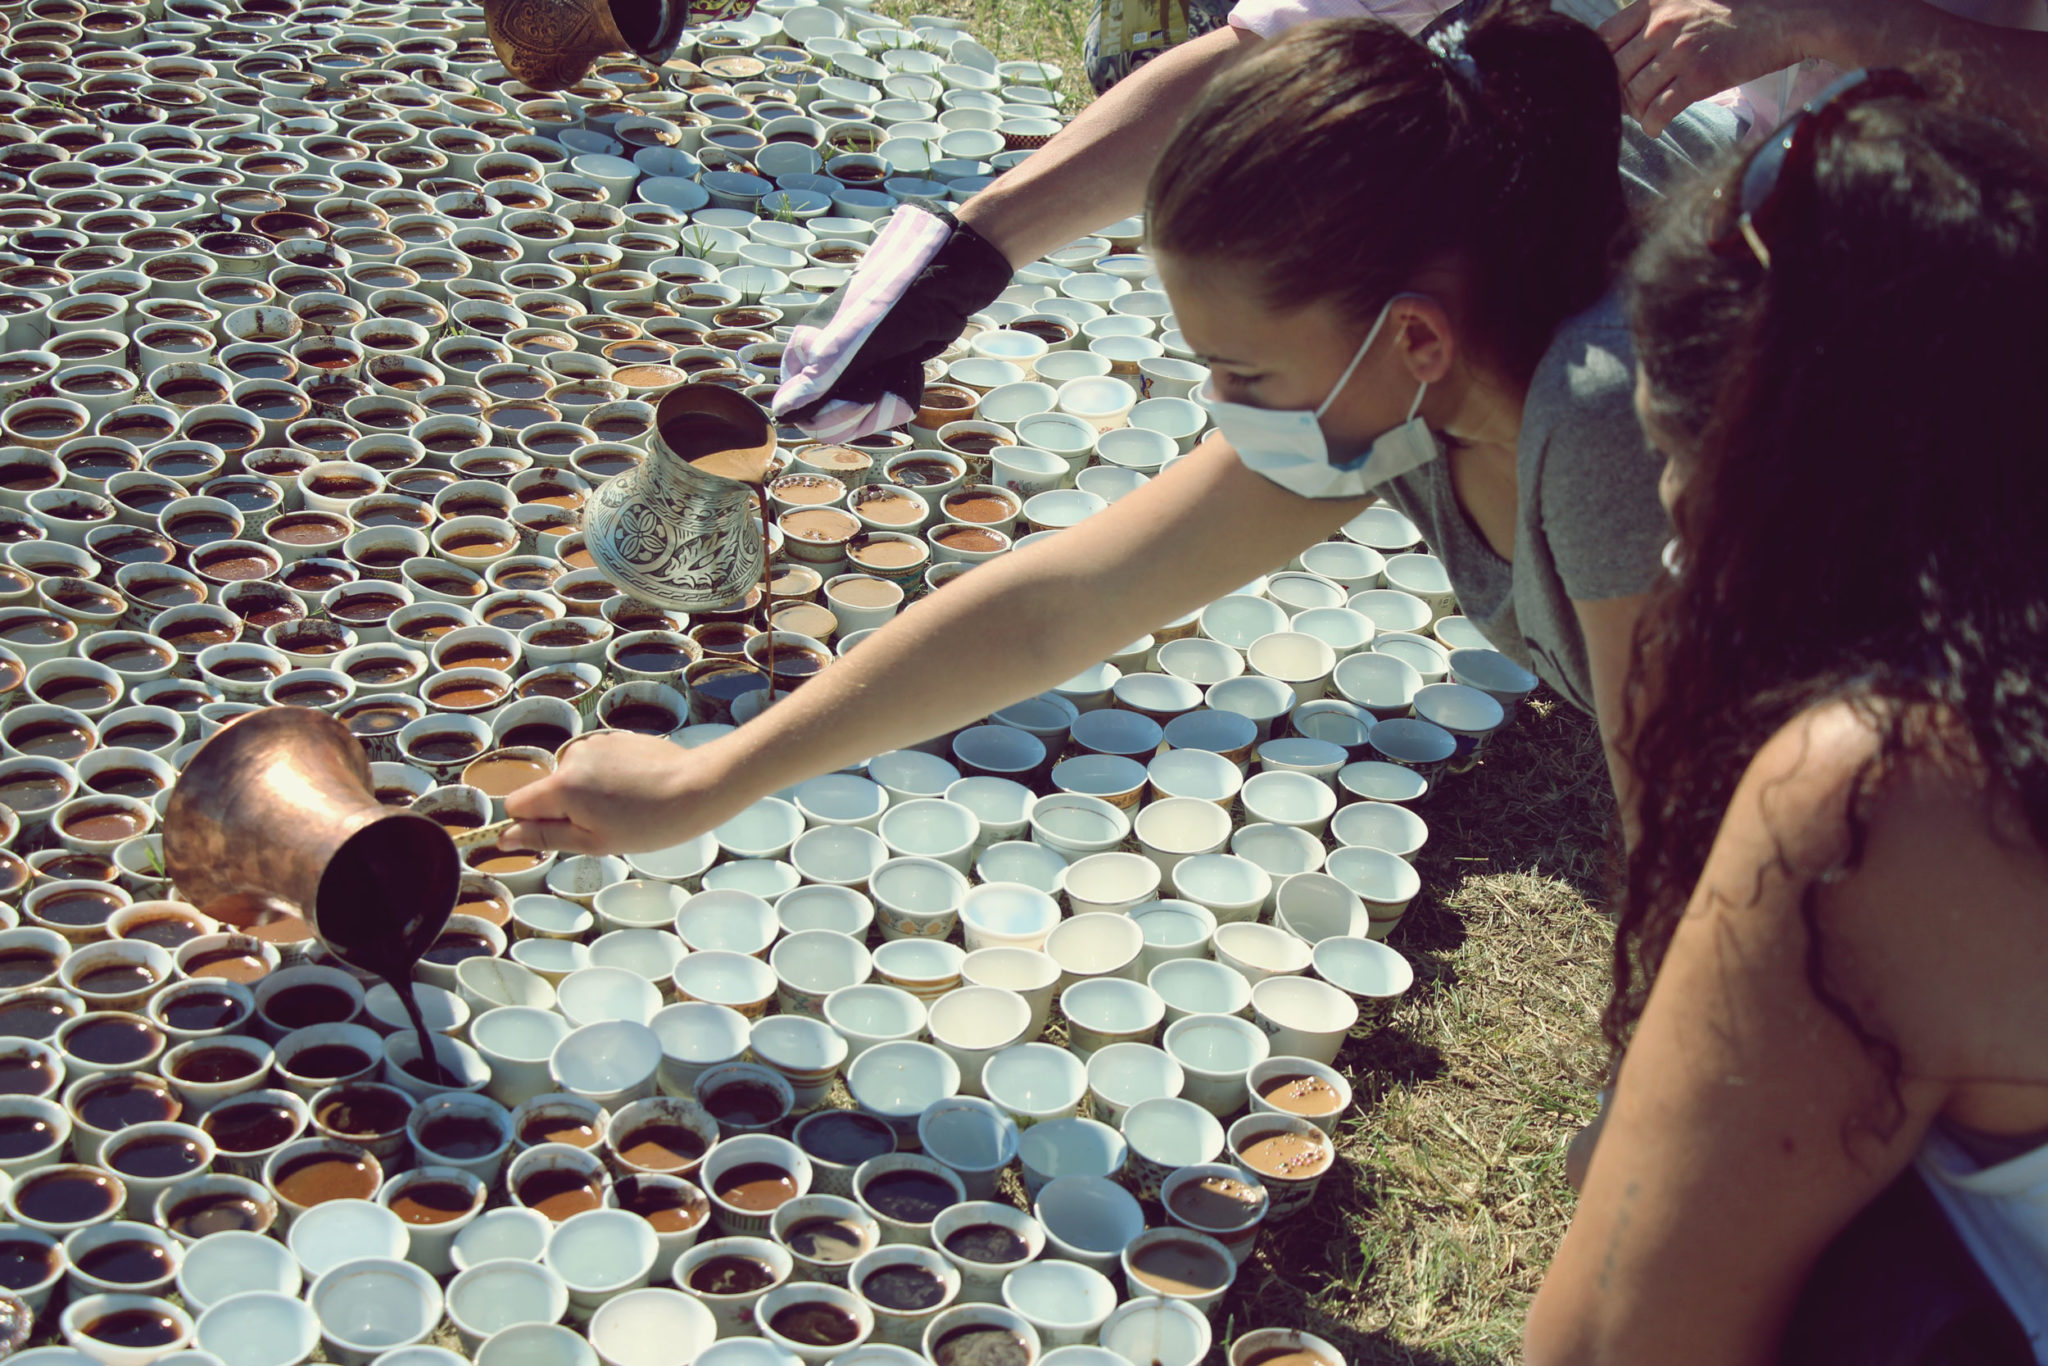 Various people sit on the ground in front of a large number of white cups, more than can easily be counted, that are closely packed together. Roughly half of the cups are filled with a brown liquid. Three people are pouring more coffee from metal containers into cups.